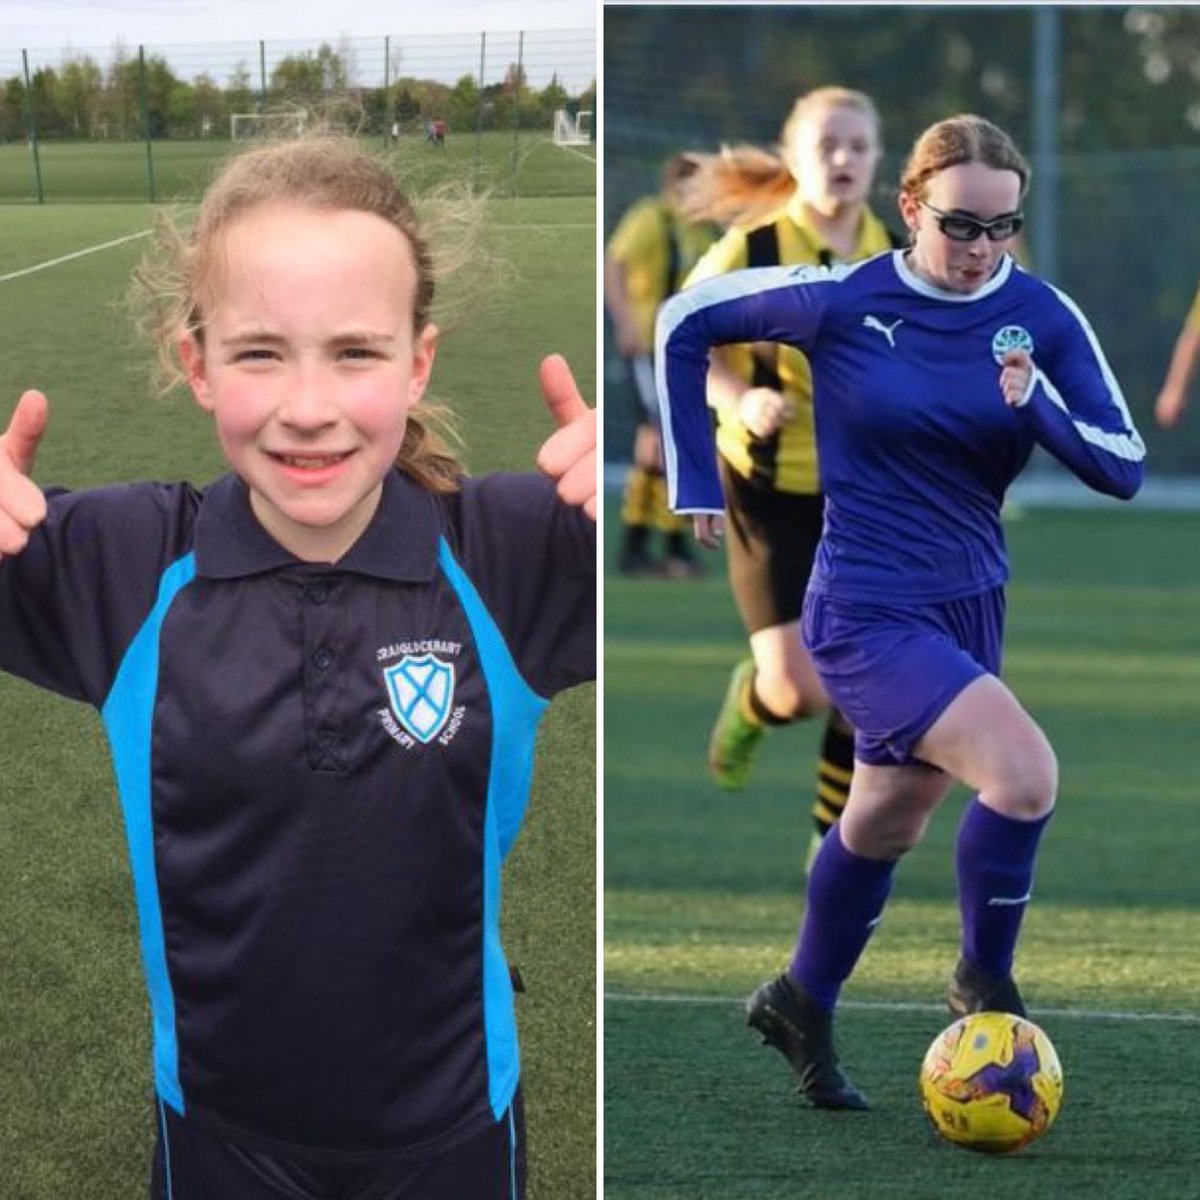 9 years ago today, I played my first football game. I am still playing, and it’s amazing to think how football became such a big part of my life. What a way to celebrate Scottish Women & Girls in Sport Week! 

#SheCanSheWill